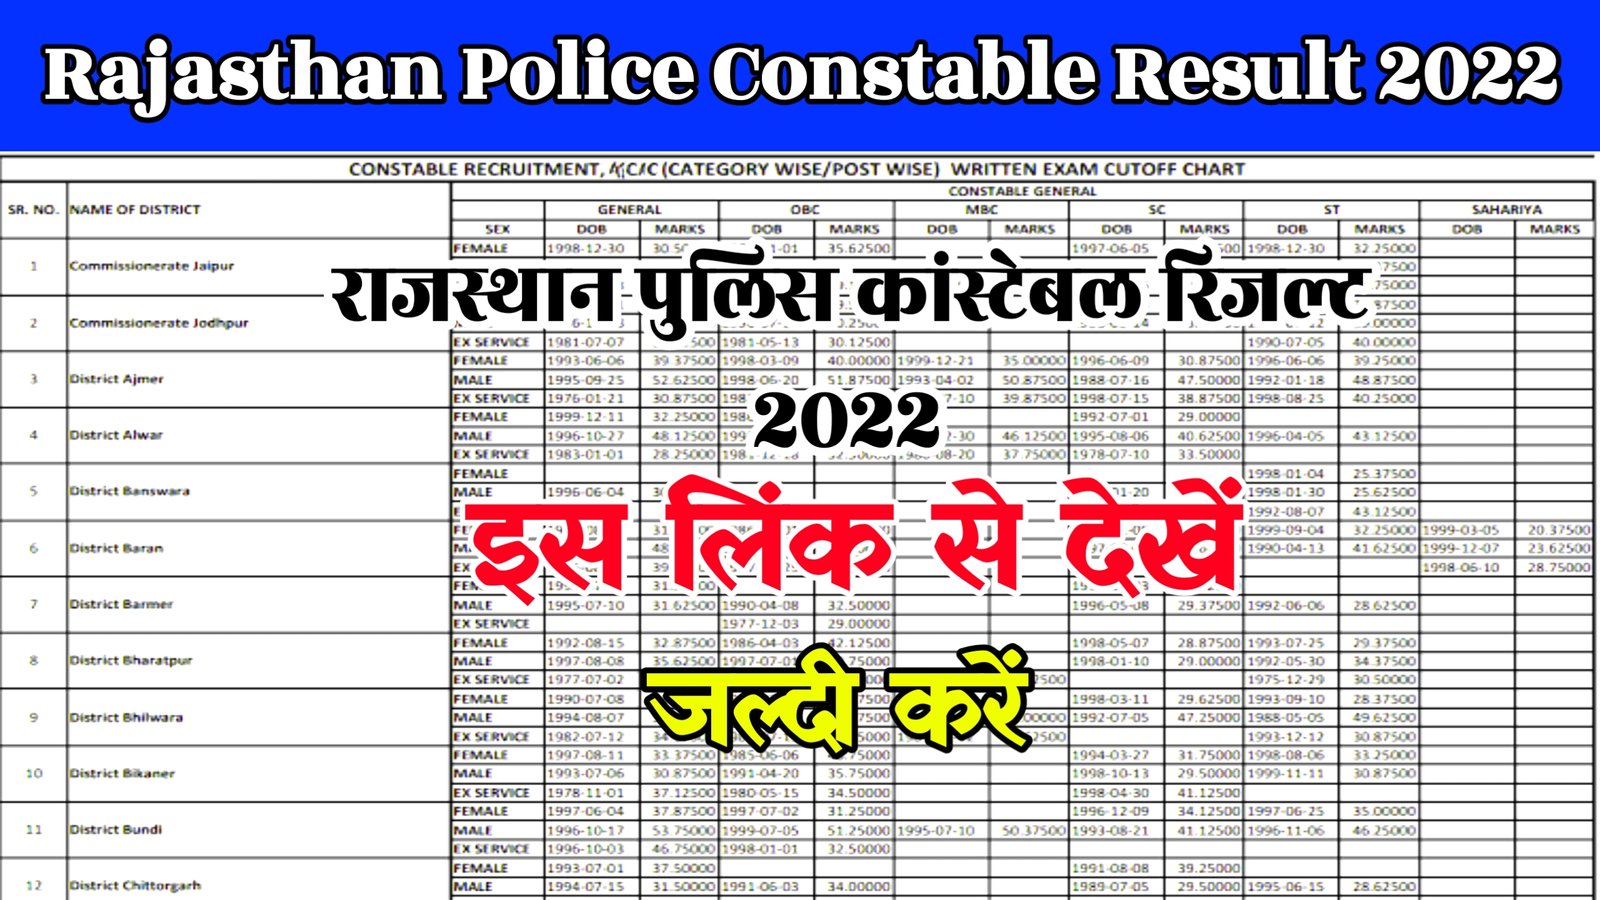 Rajasthan Police Constable Result 2022 Out now : Merit List & CutOff Marks @www.police.rajasthan.gov.in